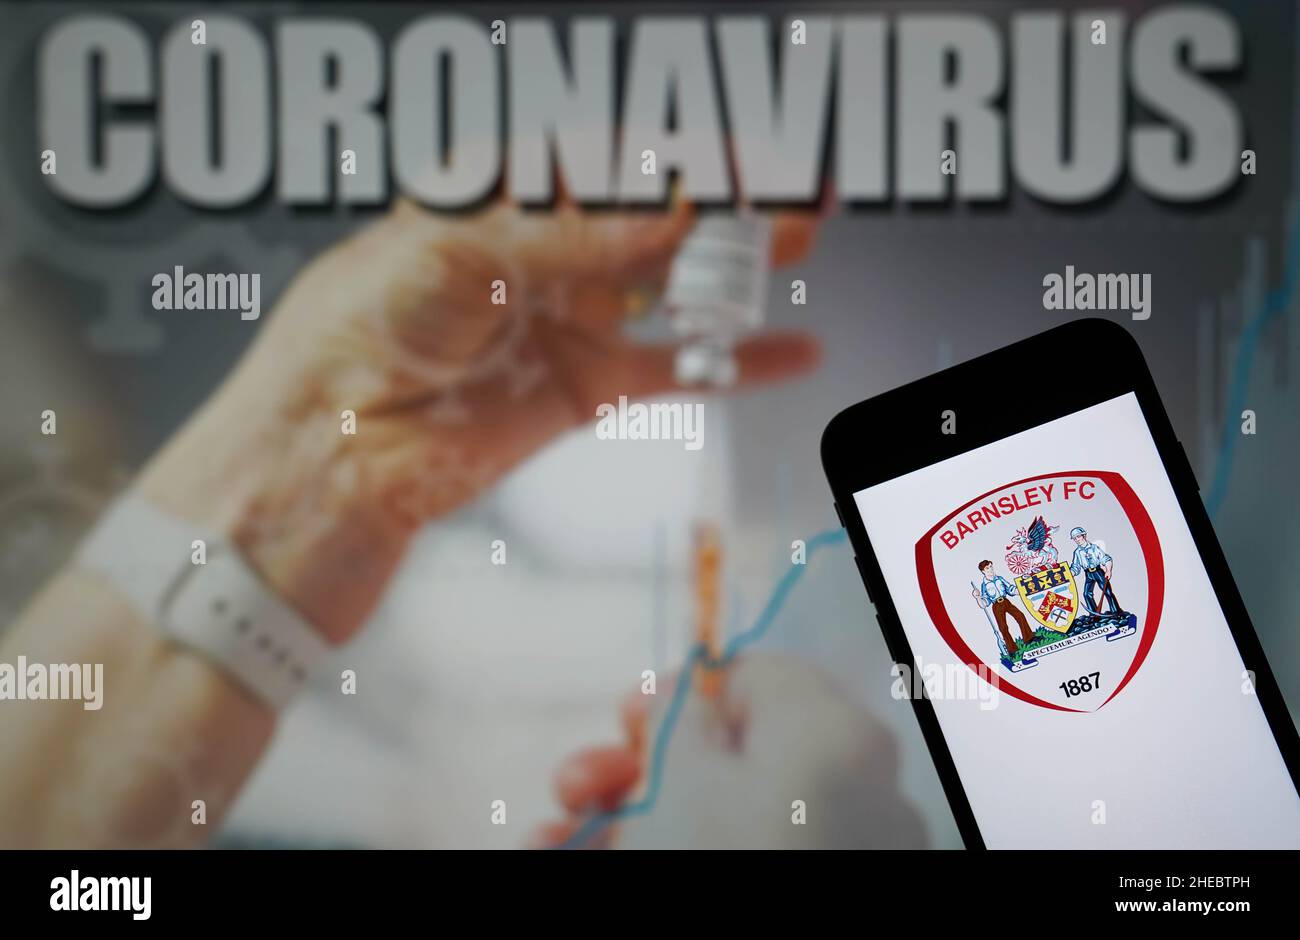 File photo dated 09-01-2021 of The Barnsley Football Club logo seen displayed on a mobile phone with a Coronavirus illustration on a monitor in the background. The Sky Bet Championship game between Barnsley and Stoke at Oakwell on Wednesday has been postponed due to the number of injuries and positive Covid-19 cases within the Barnsley camp. Issue date: Monday January 10, 2022. Stock Photo